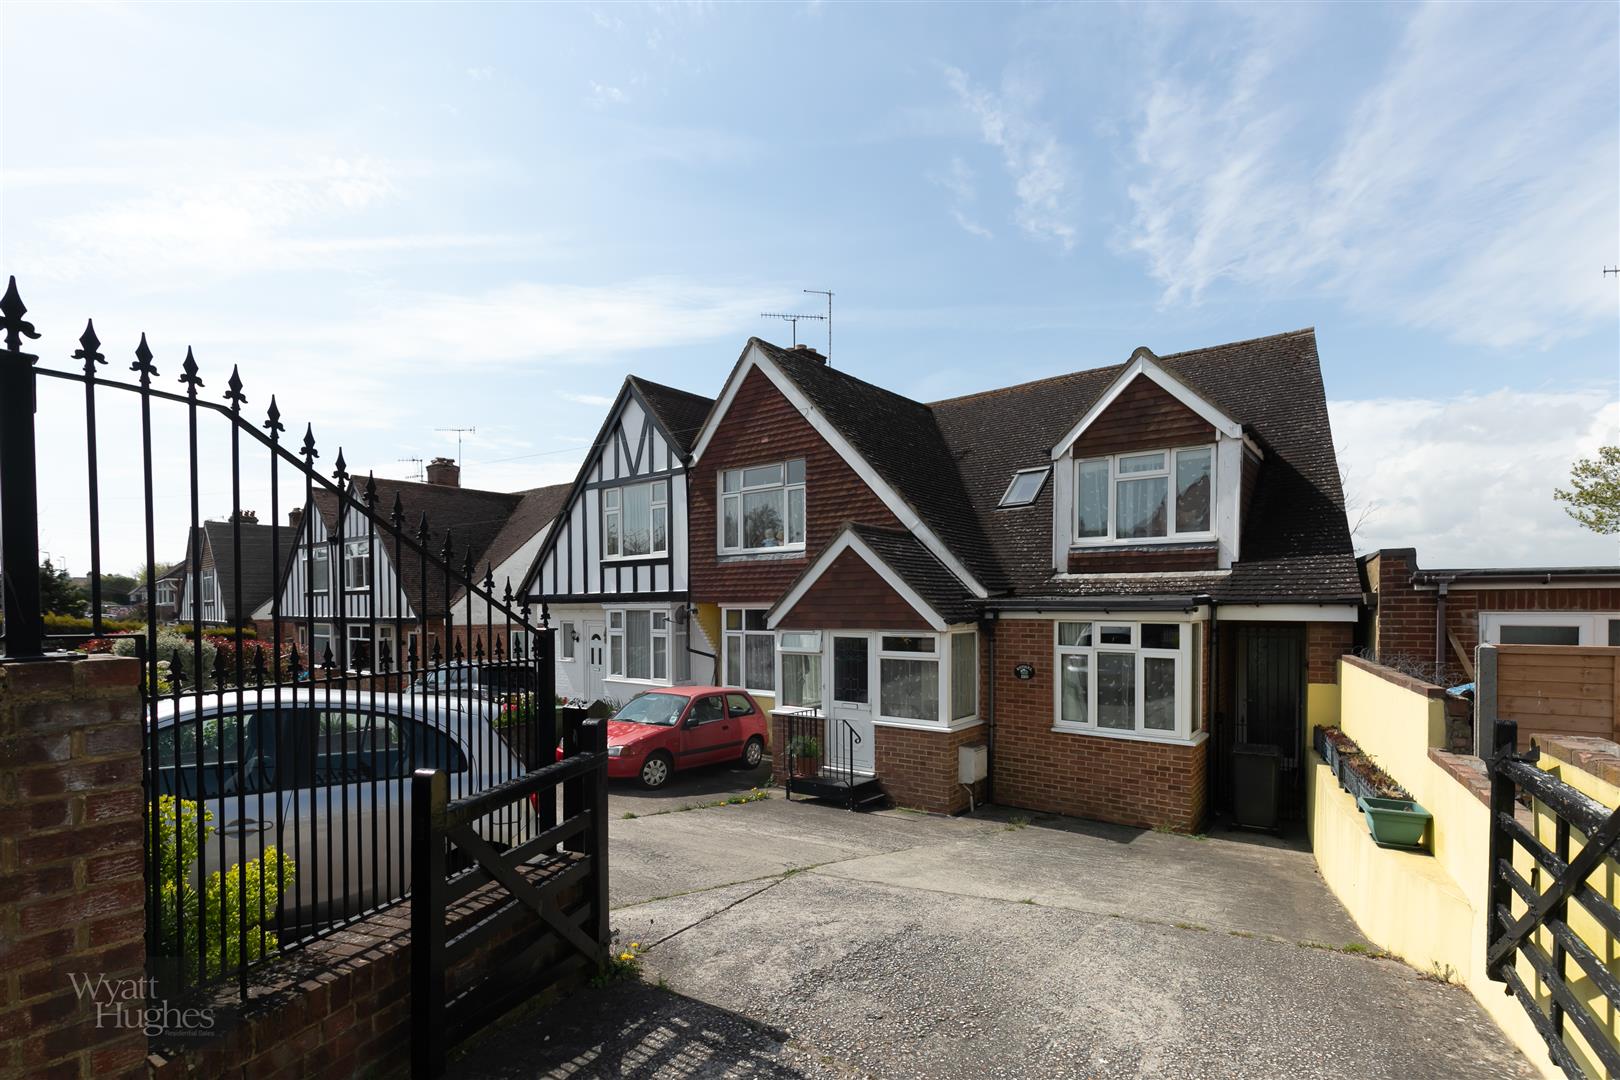 5 bed semi-detached house for sale in Sedlescombe Road North, St. Leonards-On-Sea, TN37